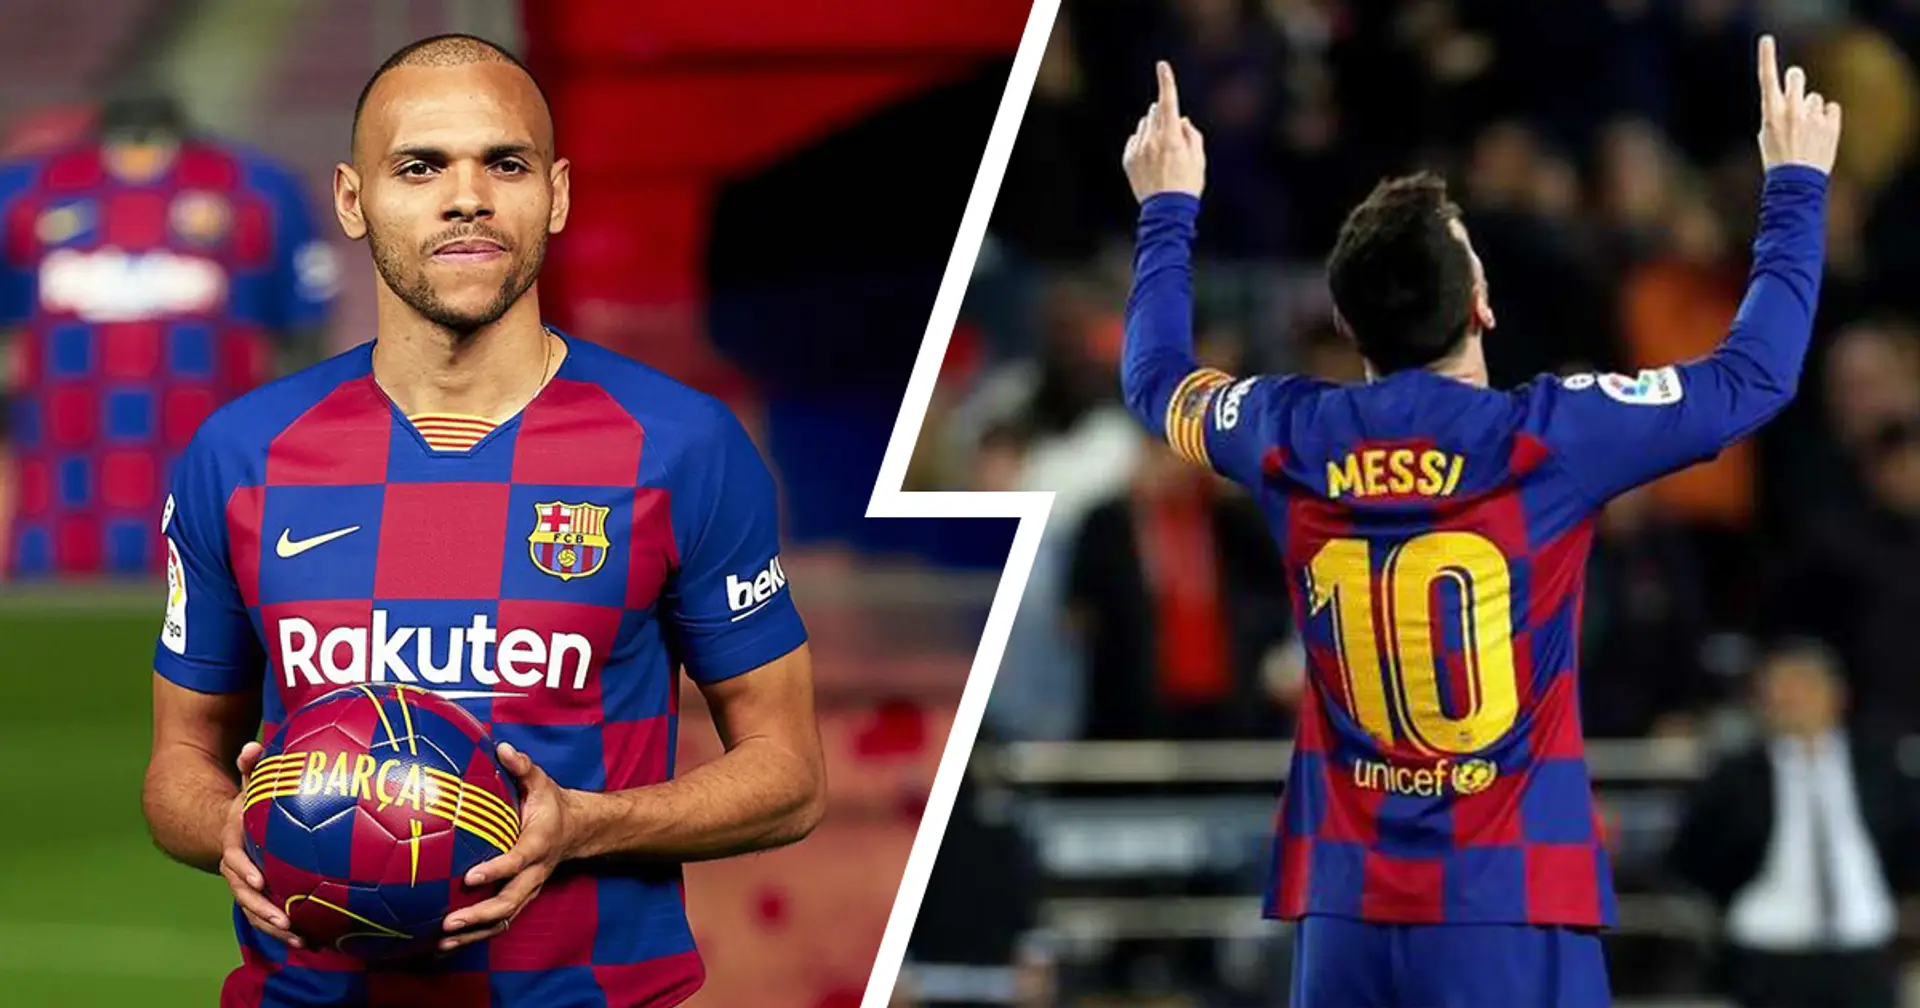 Weirdest rumour of the day: Braithwaite 'asked to be given the No. 10 shirt' after Messi's departure